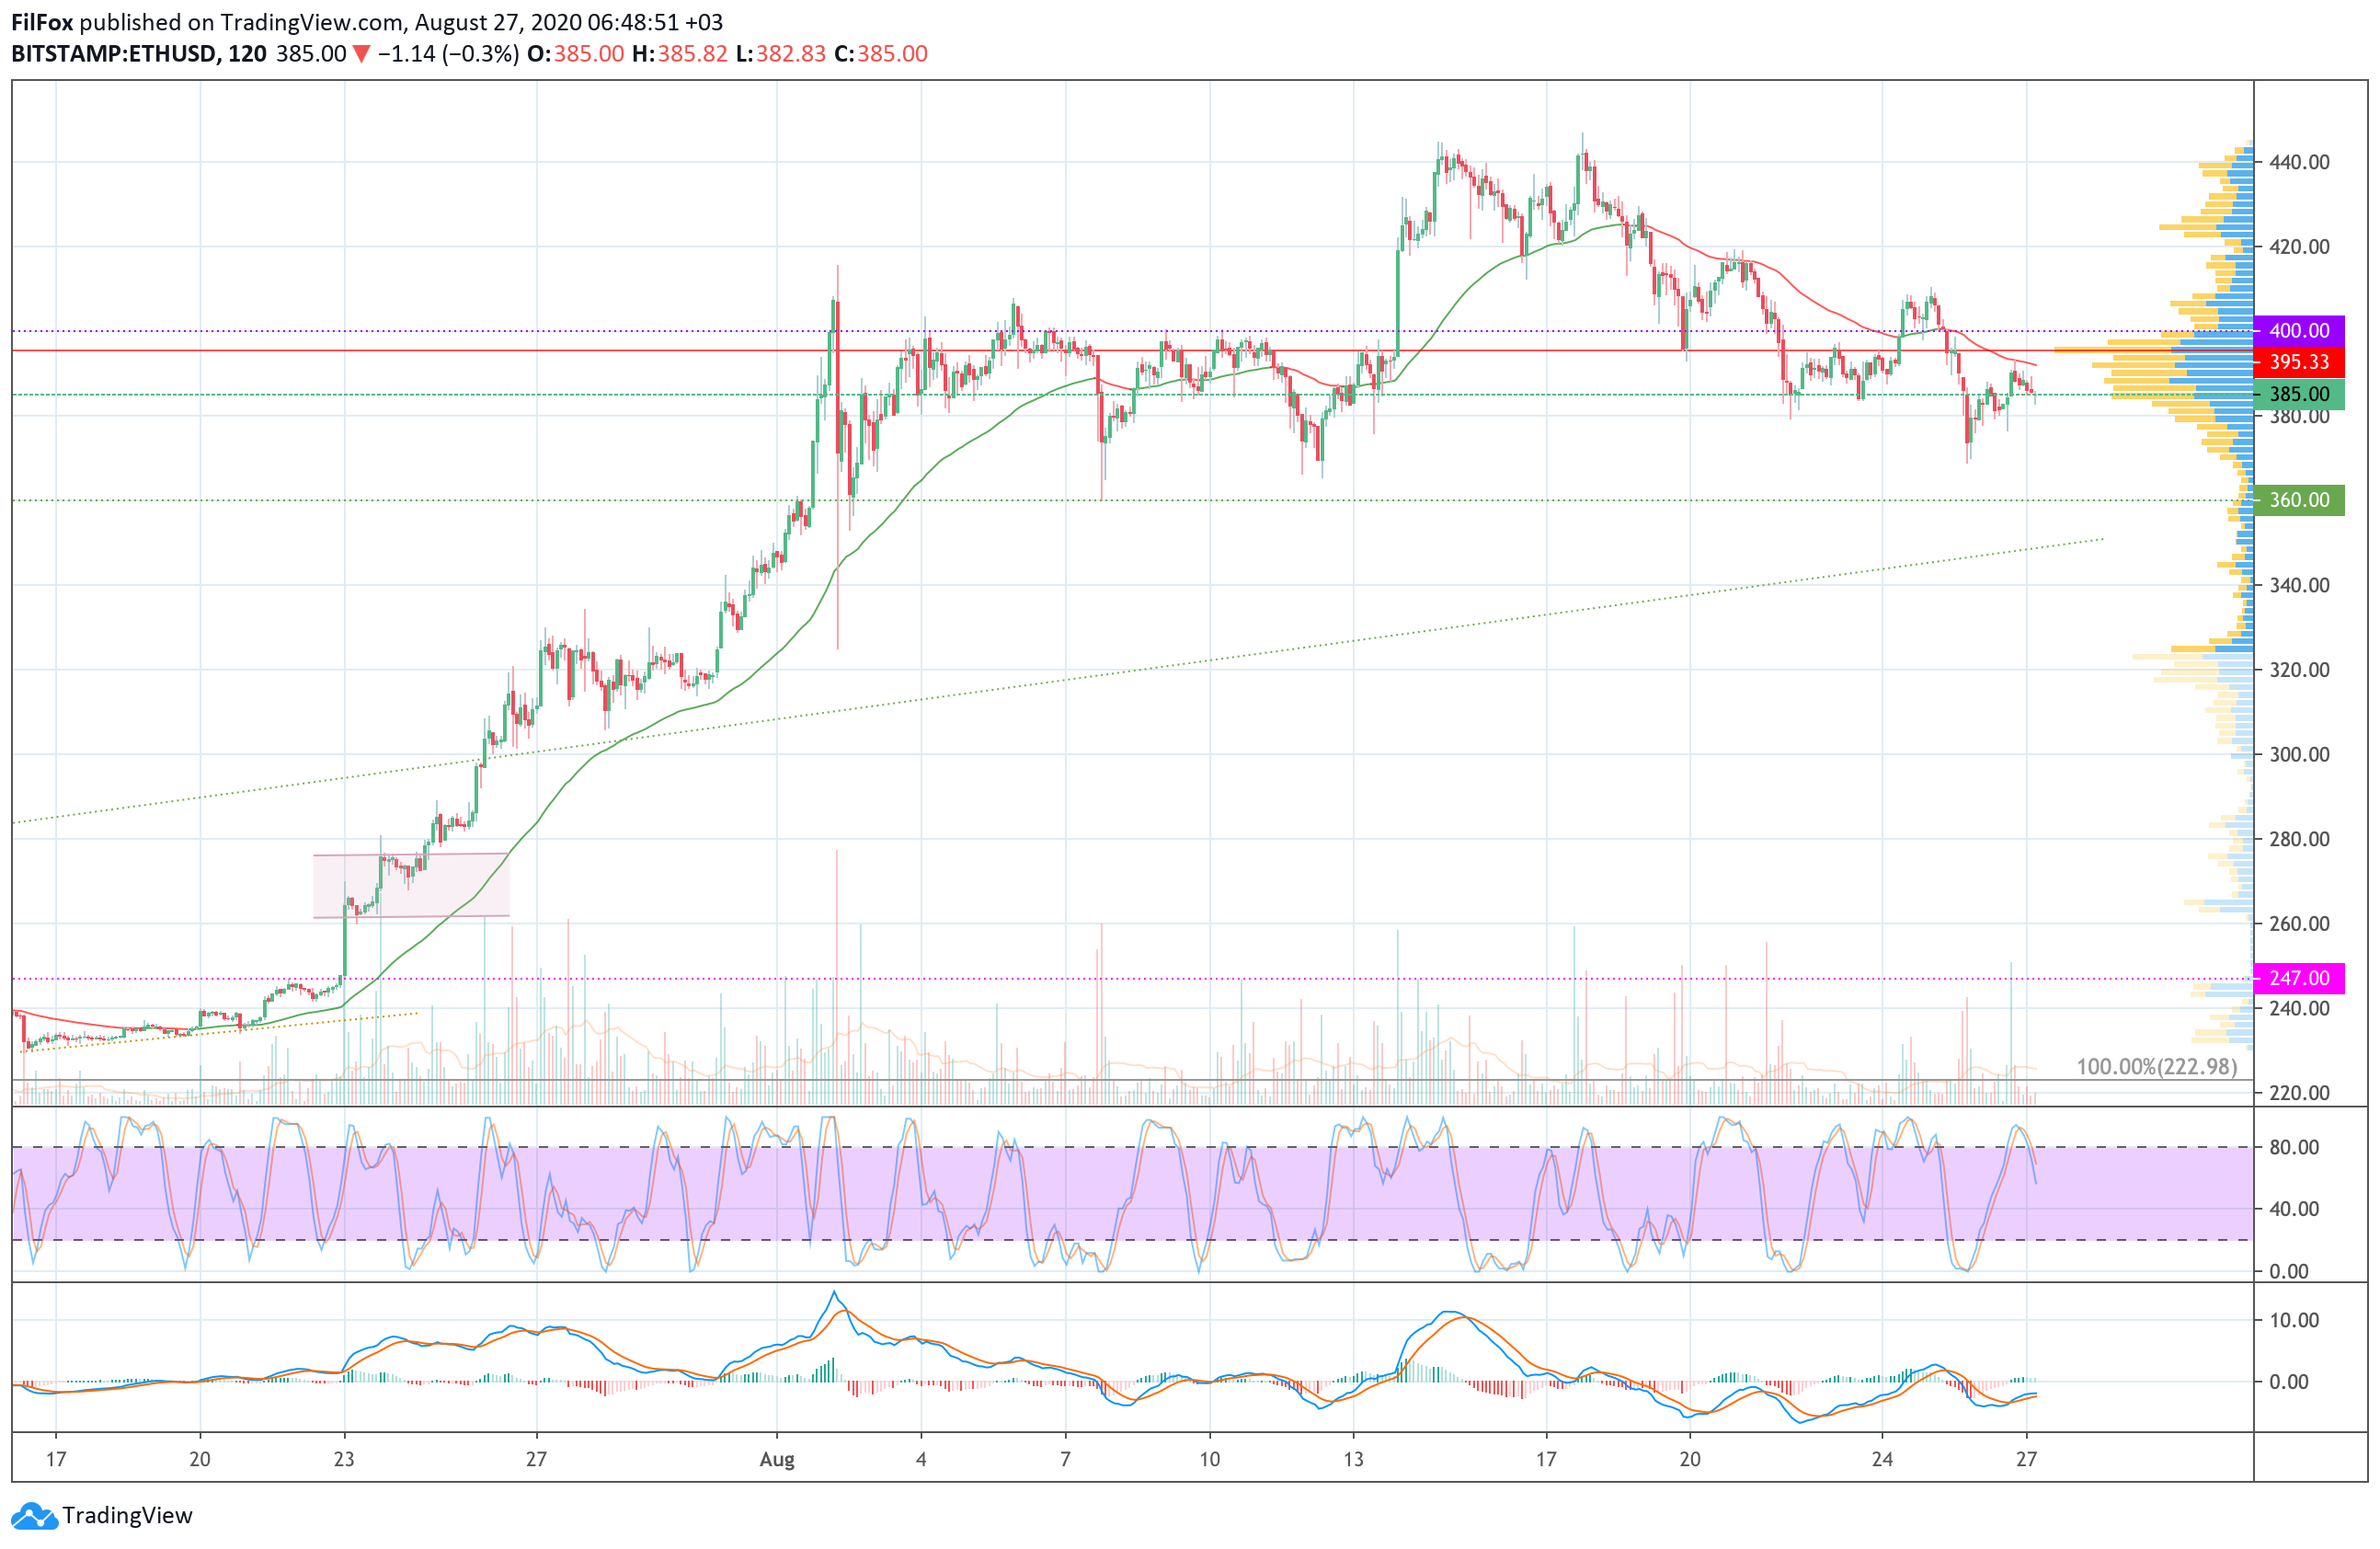 Analysis of prices for Bitcoin, Ethereum, XRP for 08/27/2020